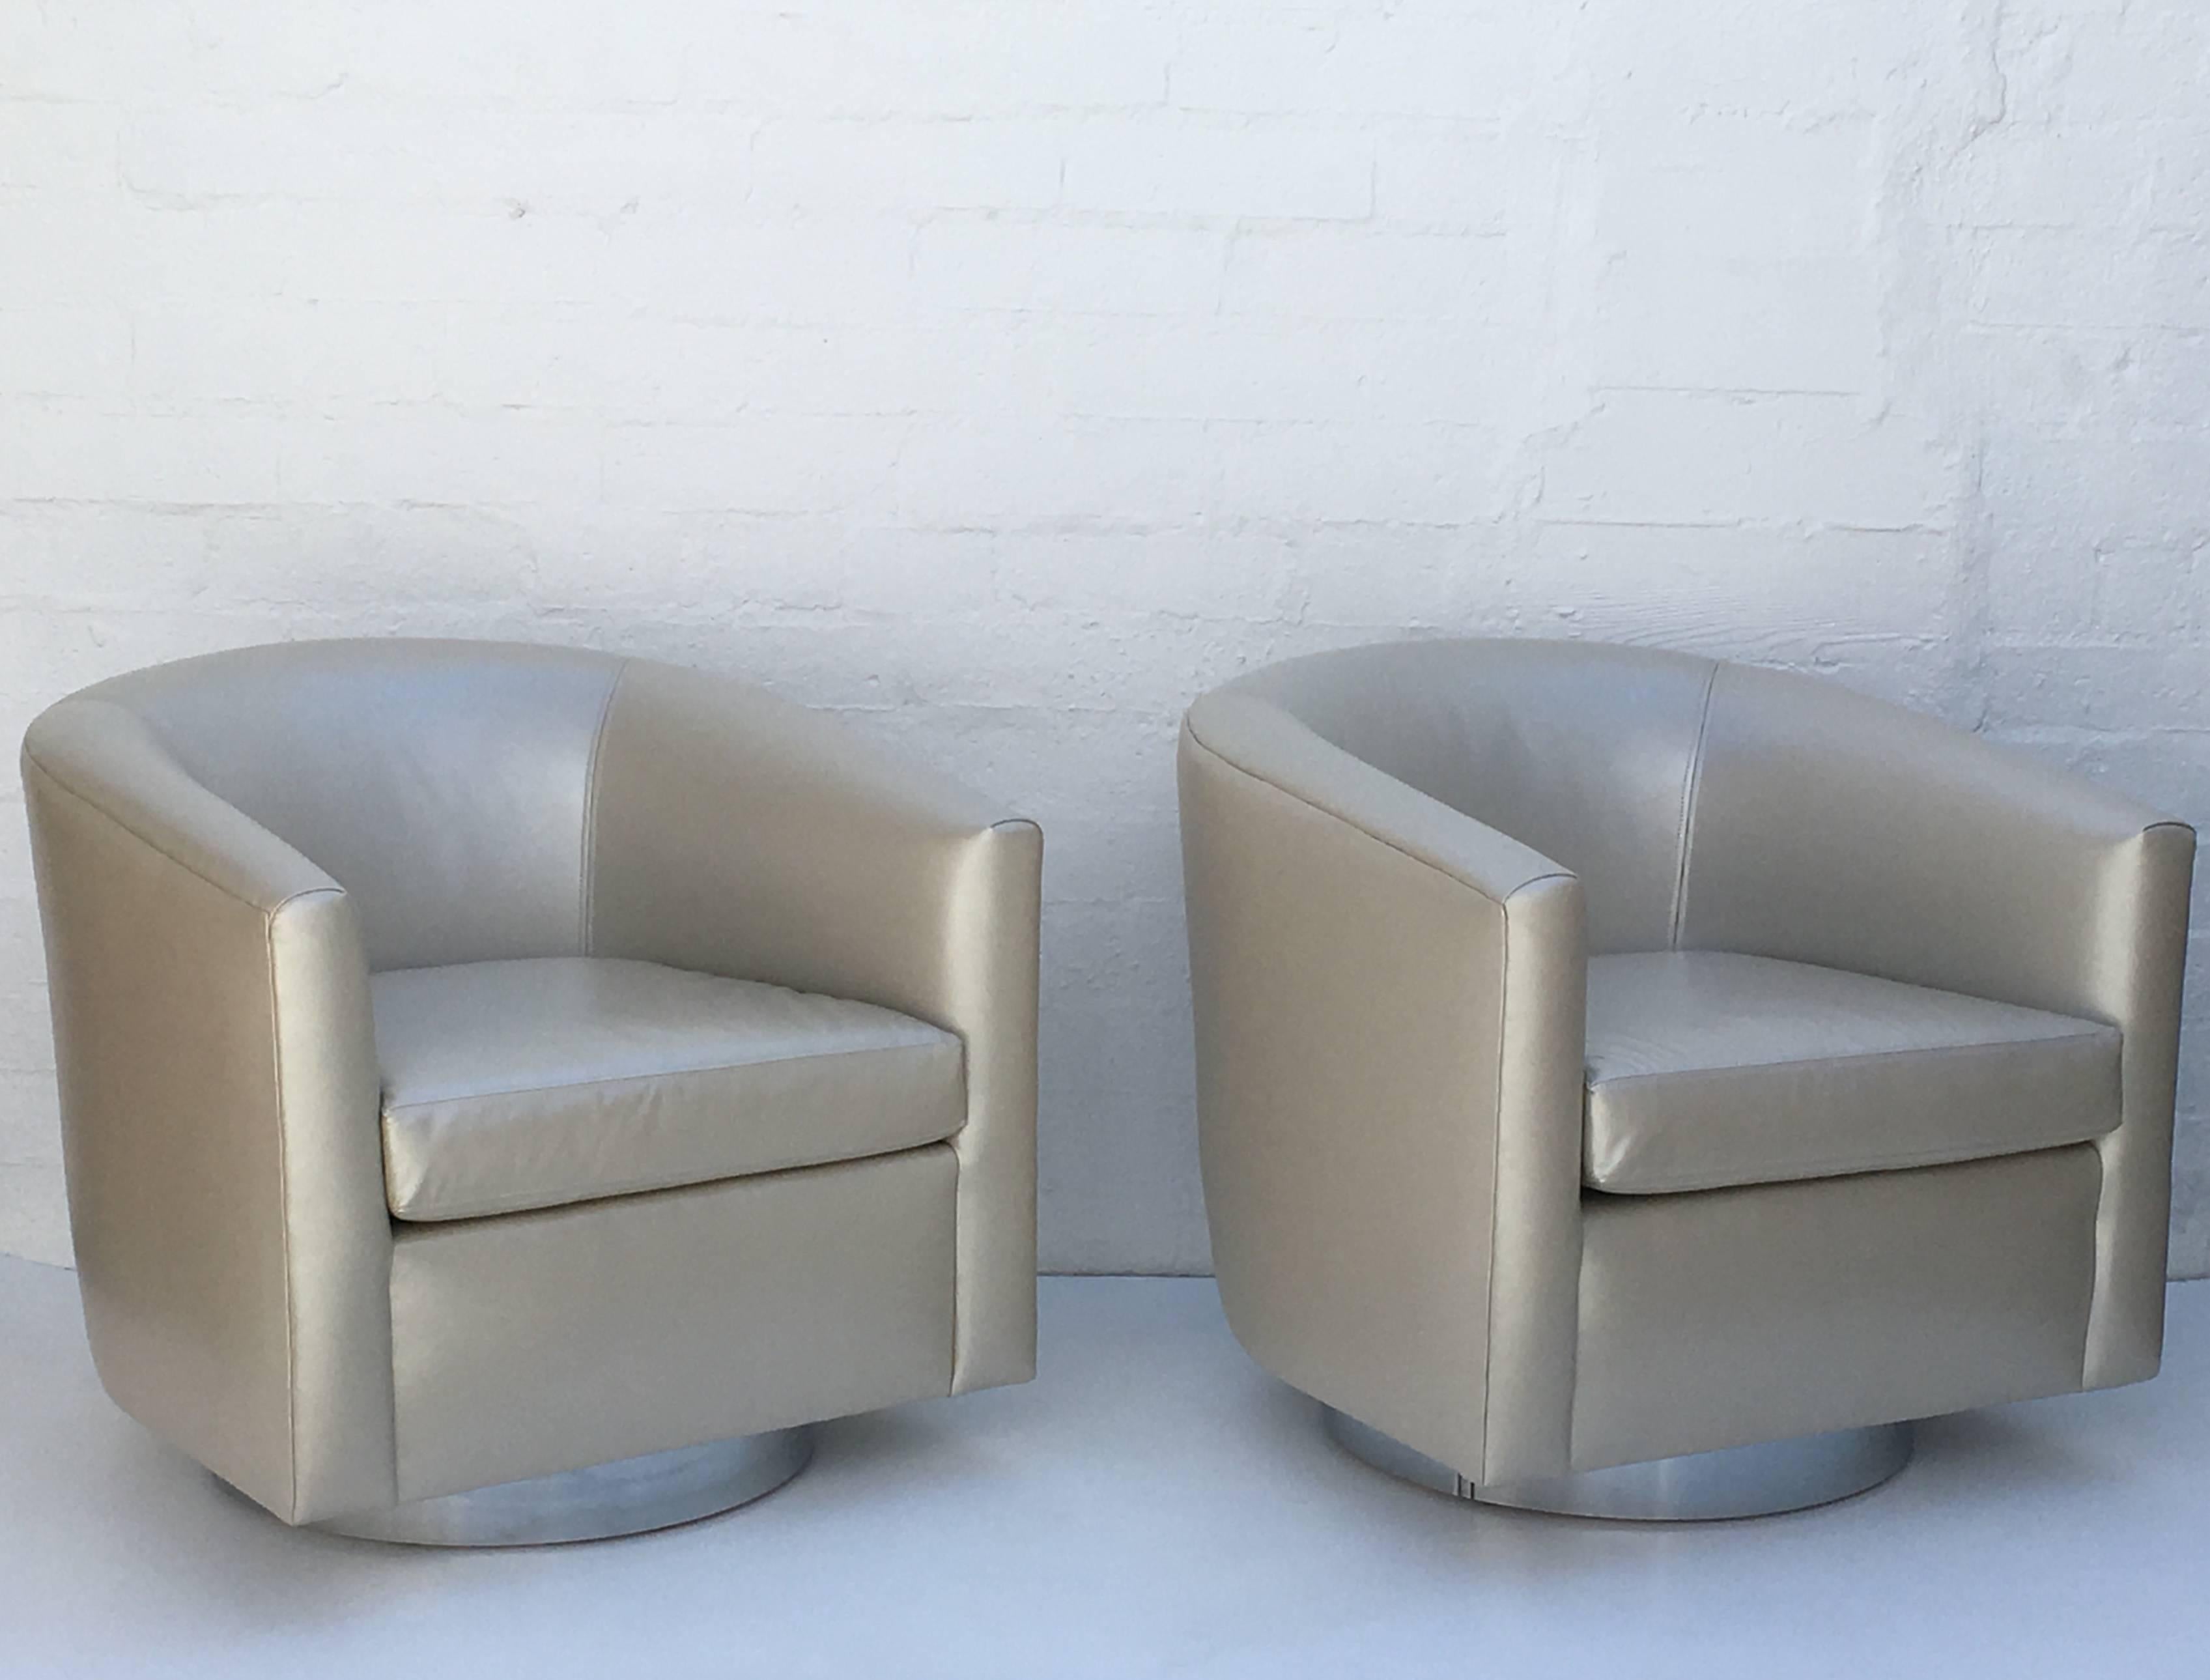 Polished Chrome and Leather Swivel Chairs by Martin Brattrud for Steve Chase